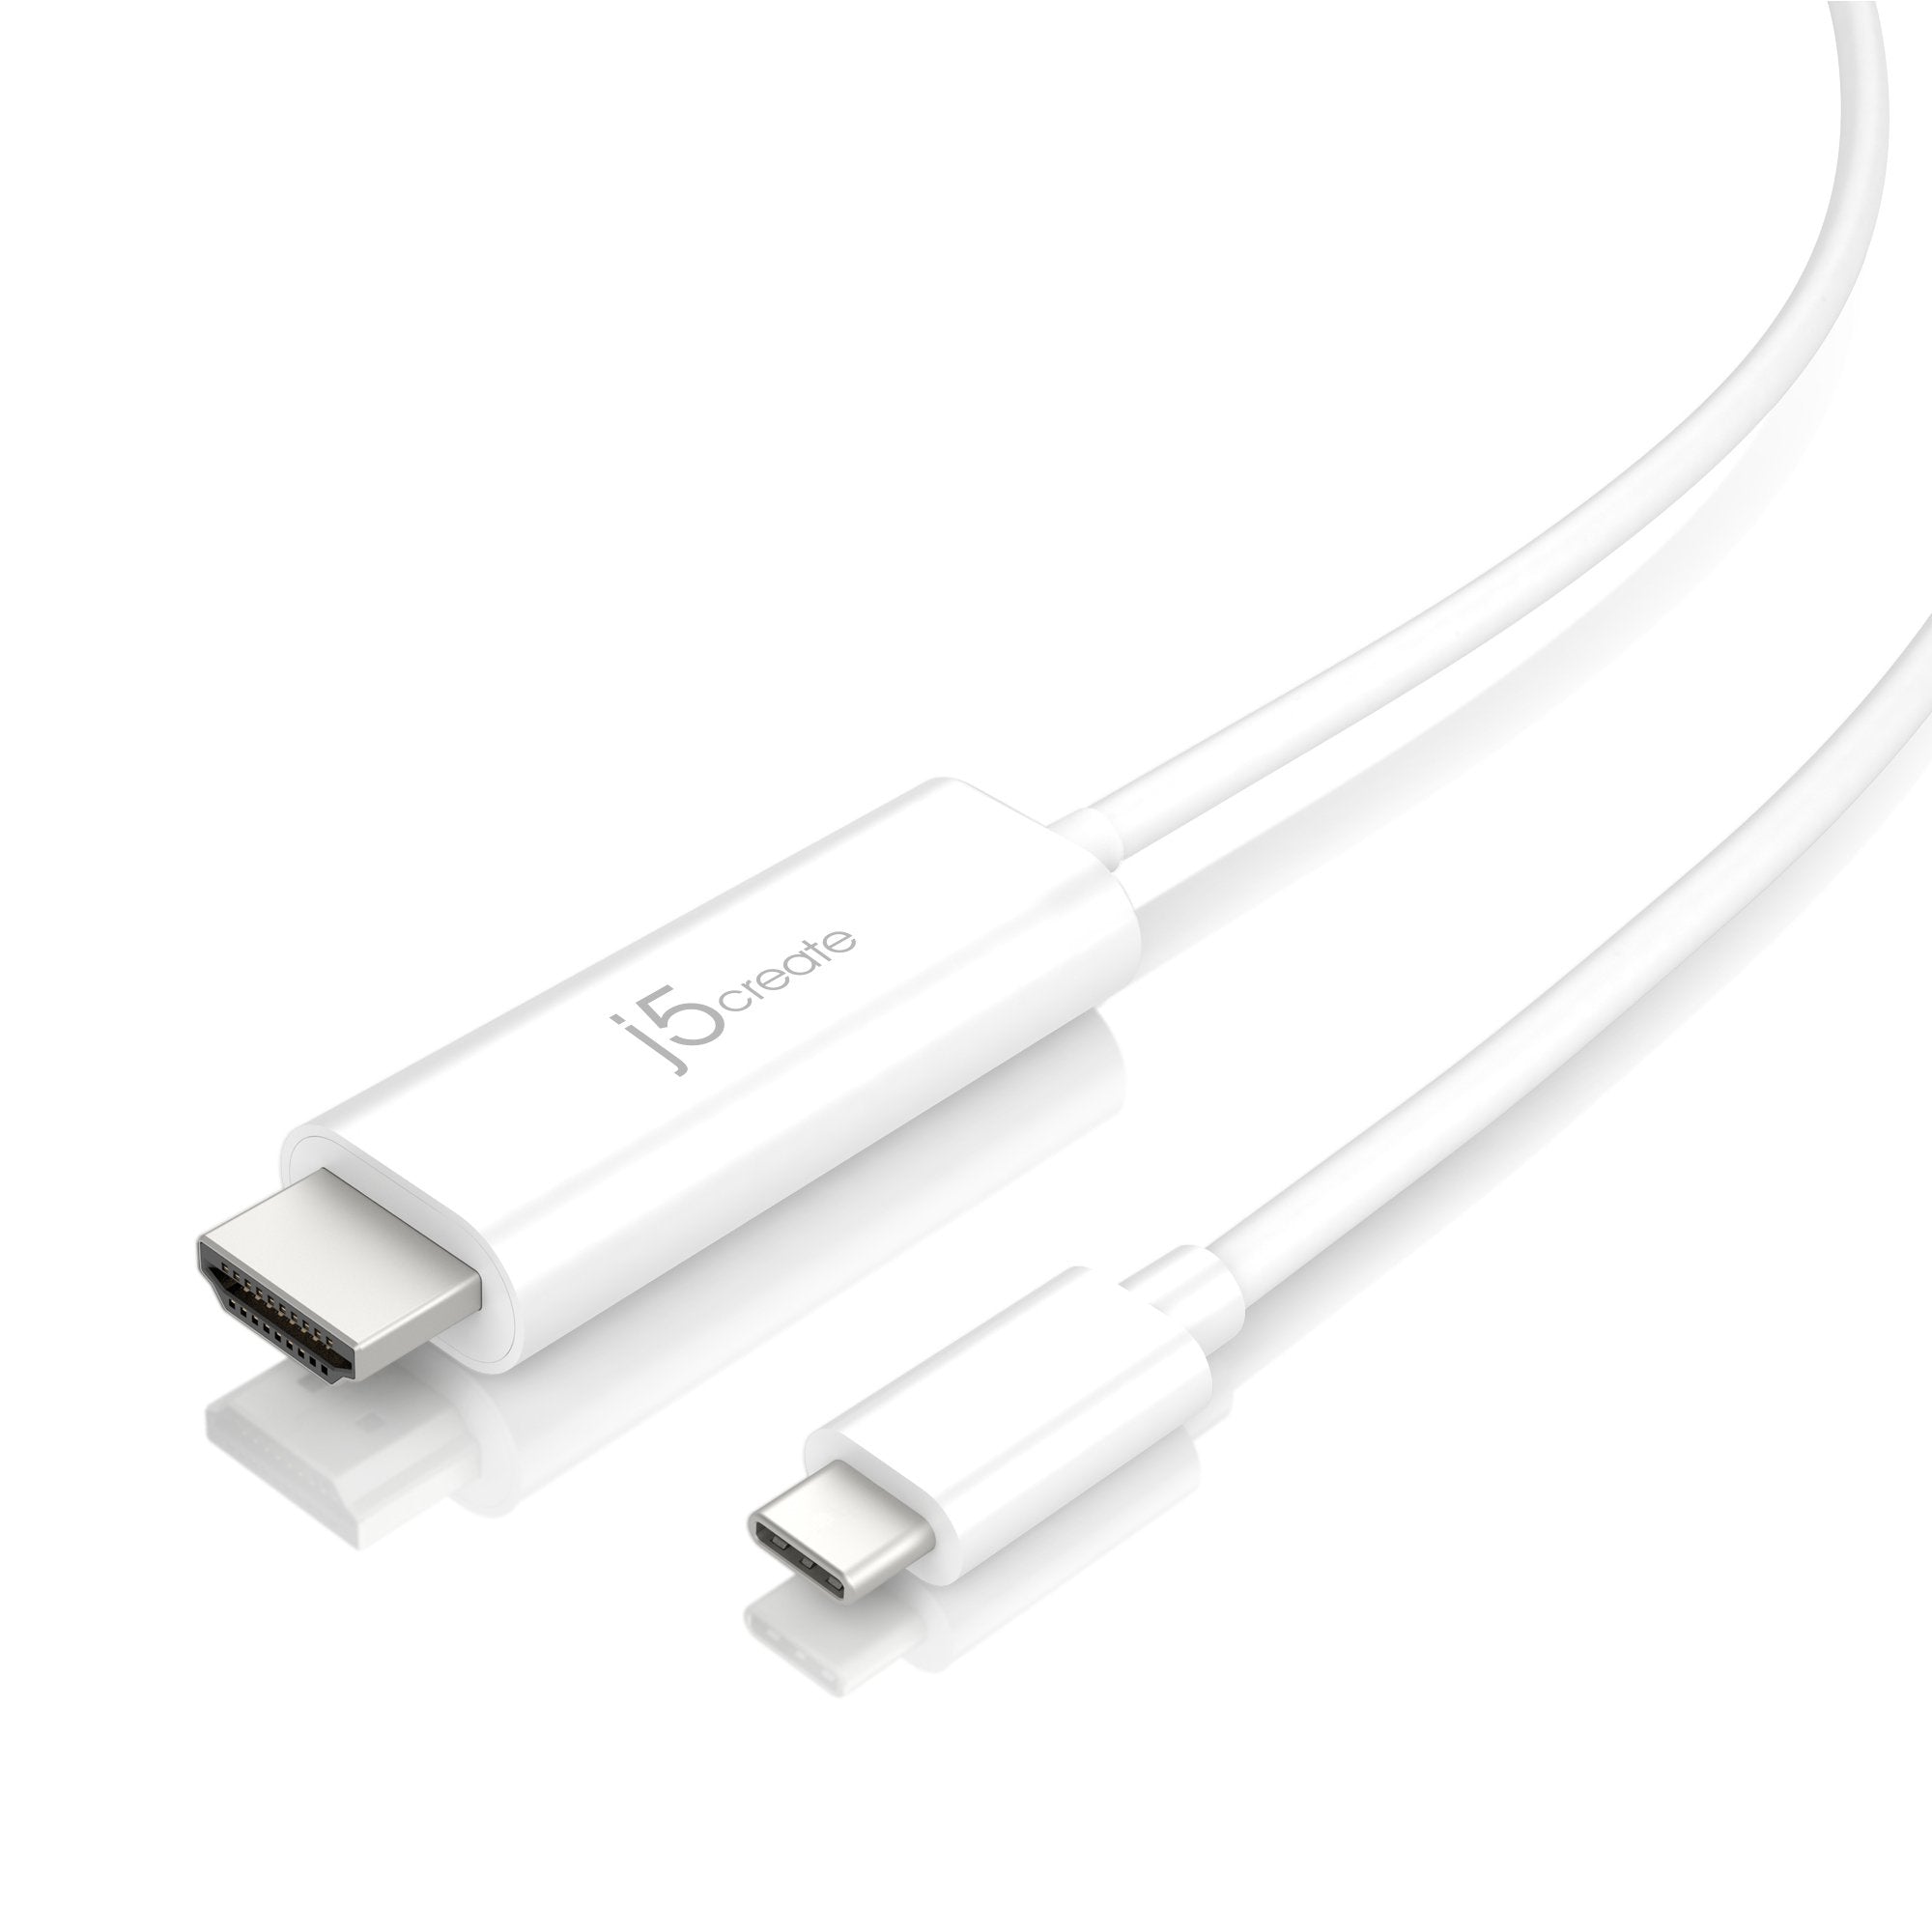 USB-C® to 4K HDMI™ Cable – j5create